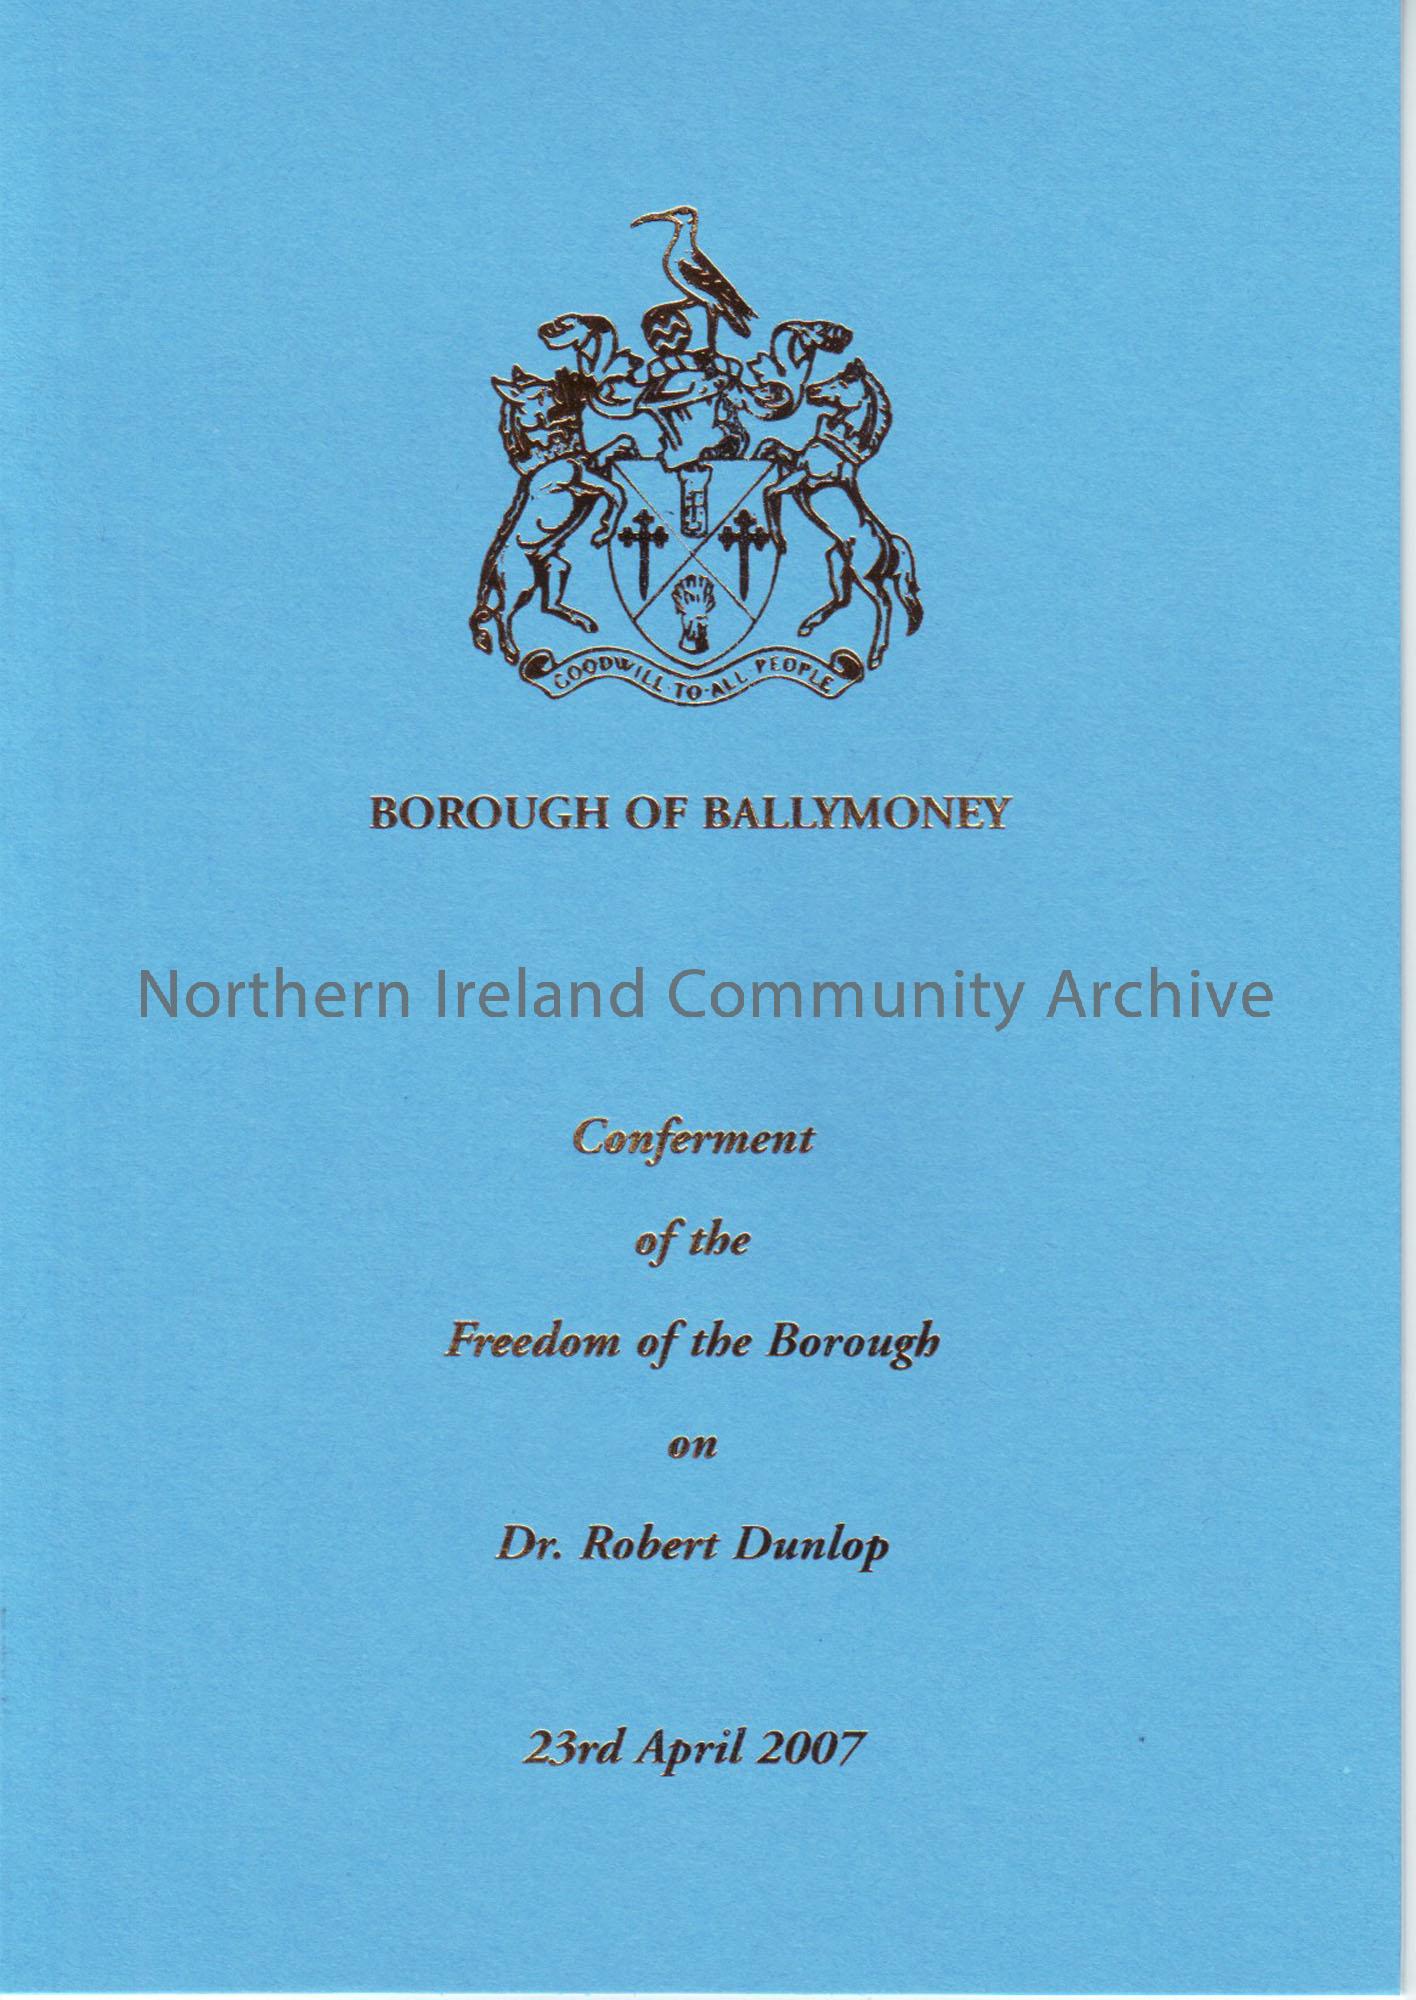 Borough of Ballymoney conferment of the Freedom of the Borough on Dr. Robert Dunlop 23rd April 2007. Civic Luncheon following freedom ceremony program…